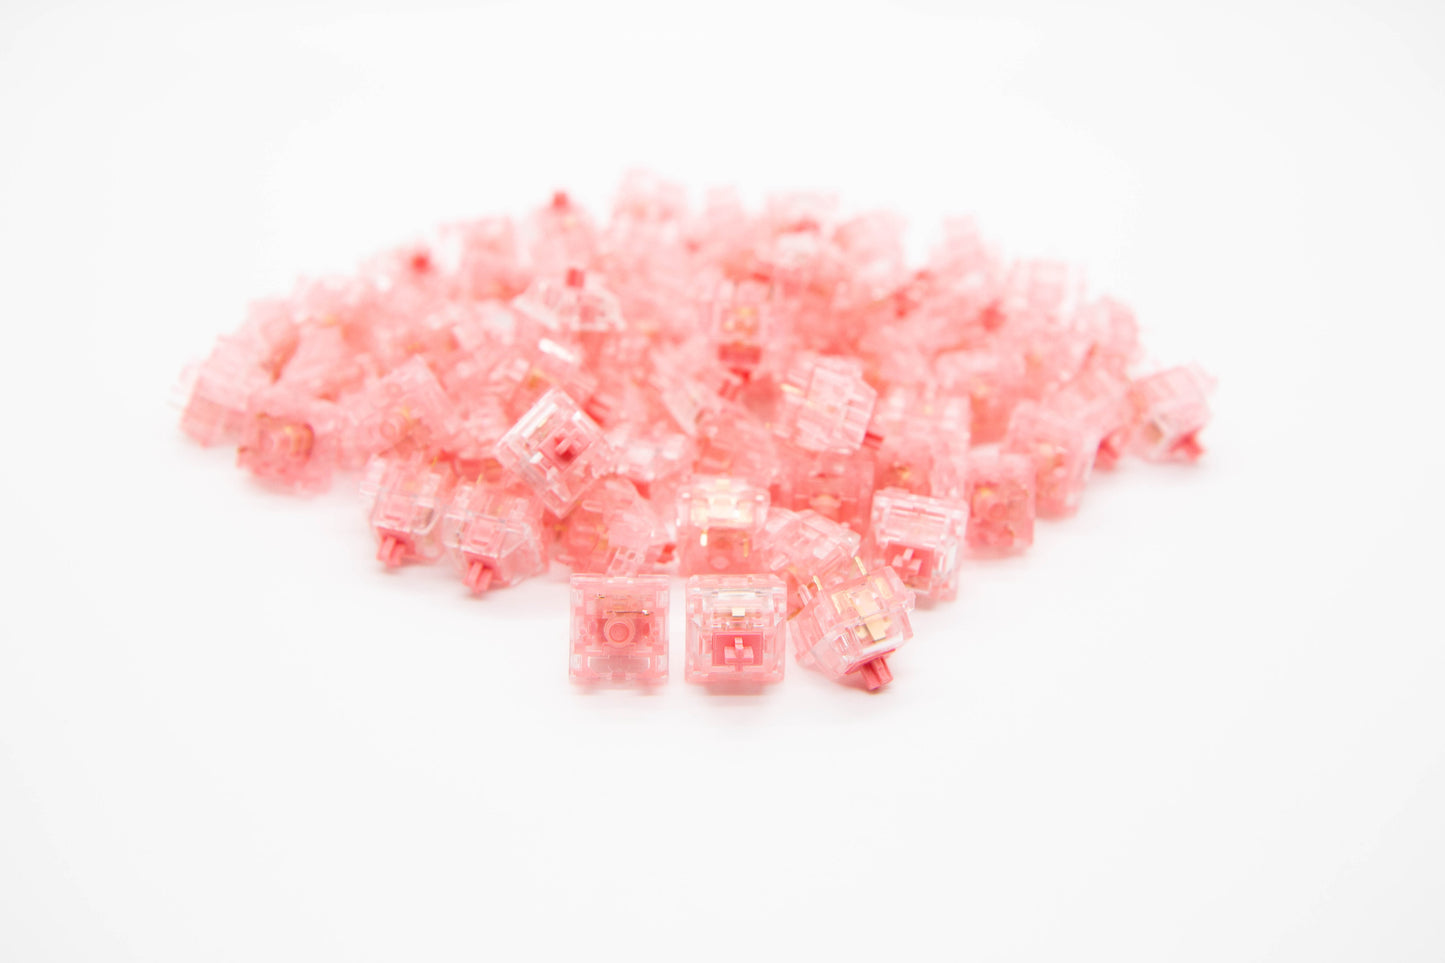 Close-up shot of a pile of Strawberry mechanical keyboard switches featuring pink transparent housing and pink stems